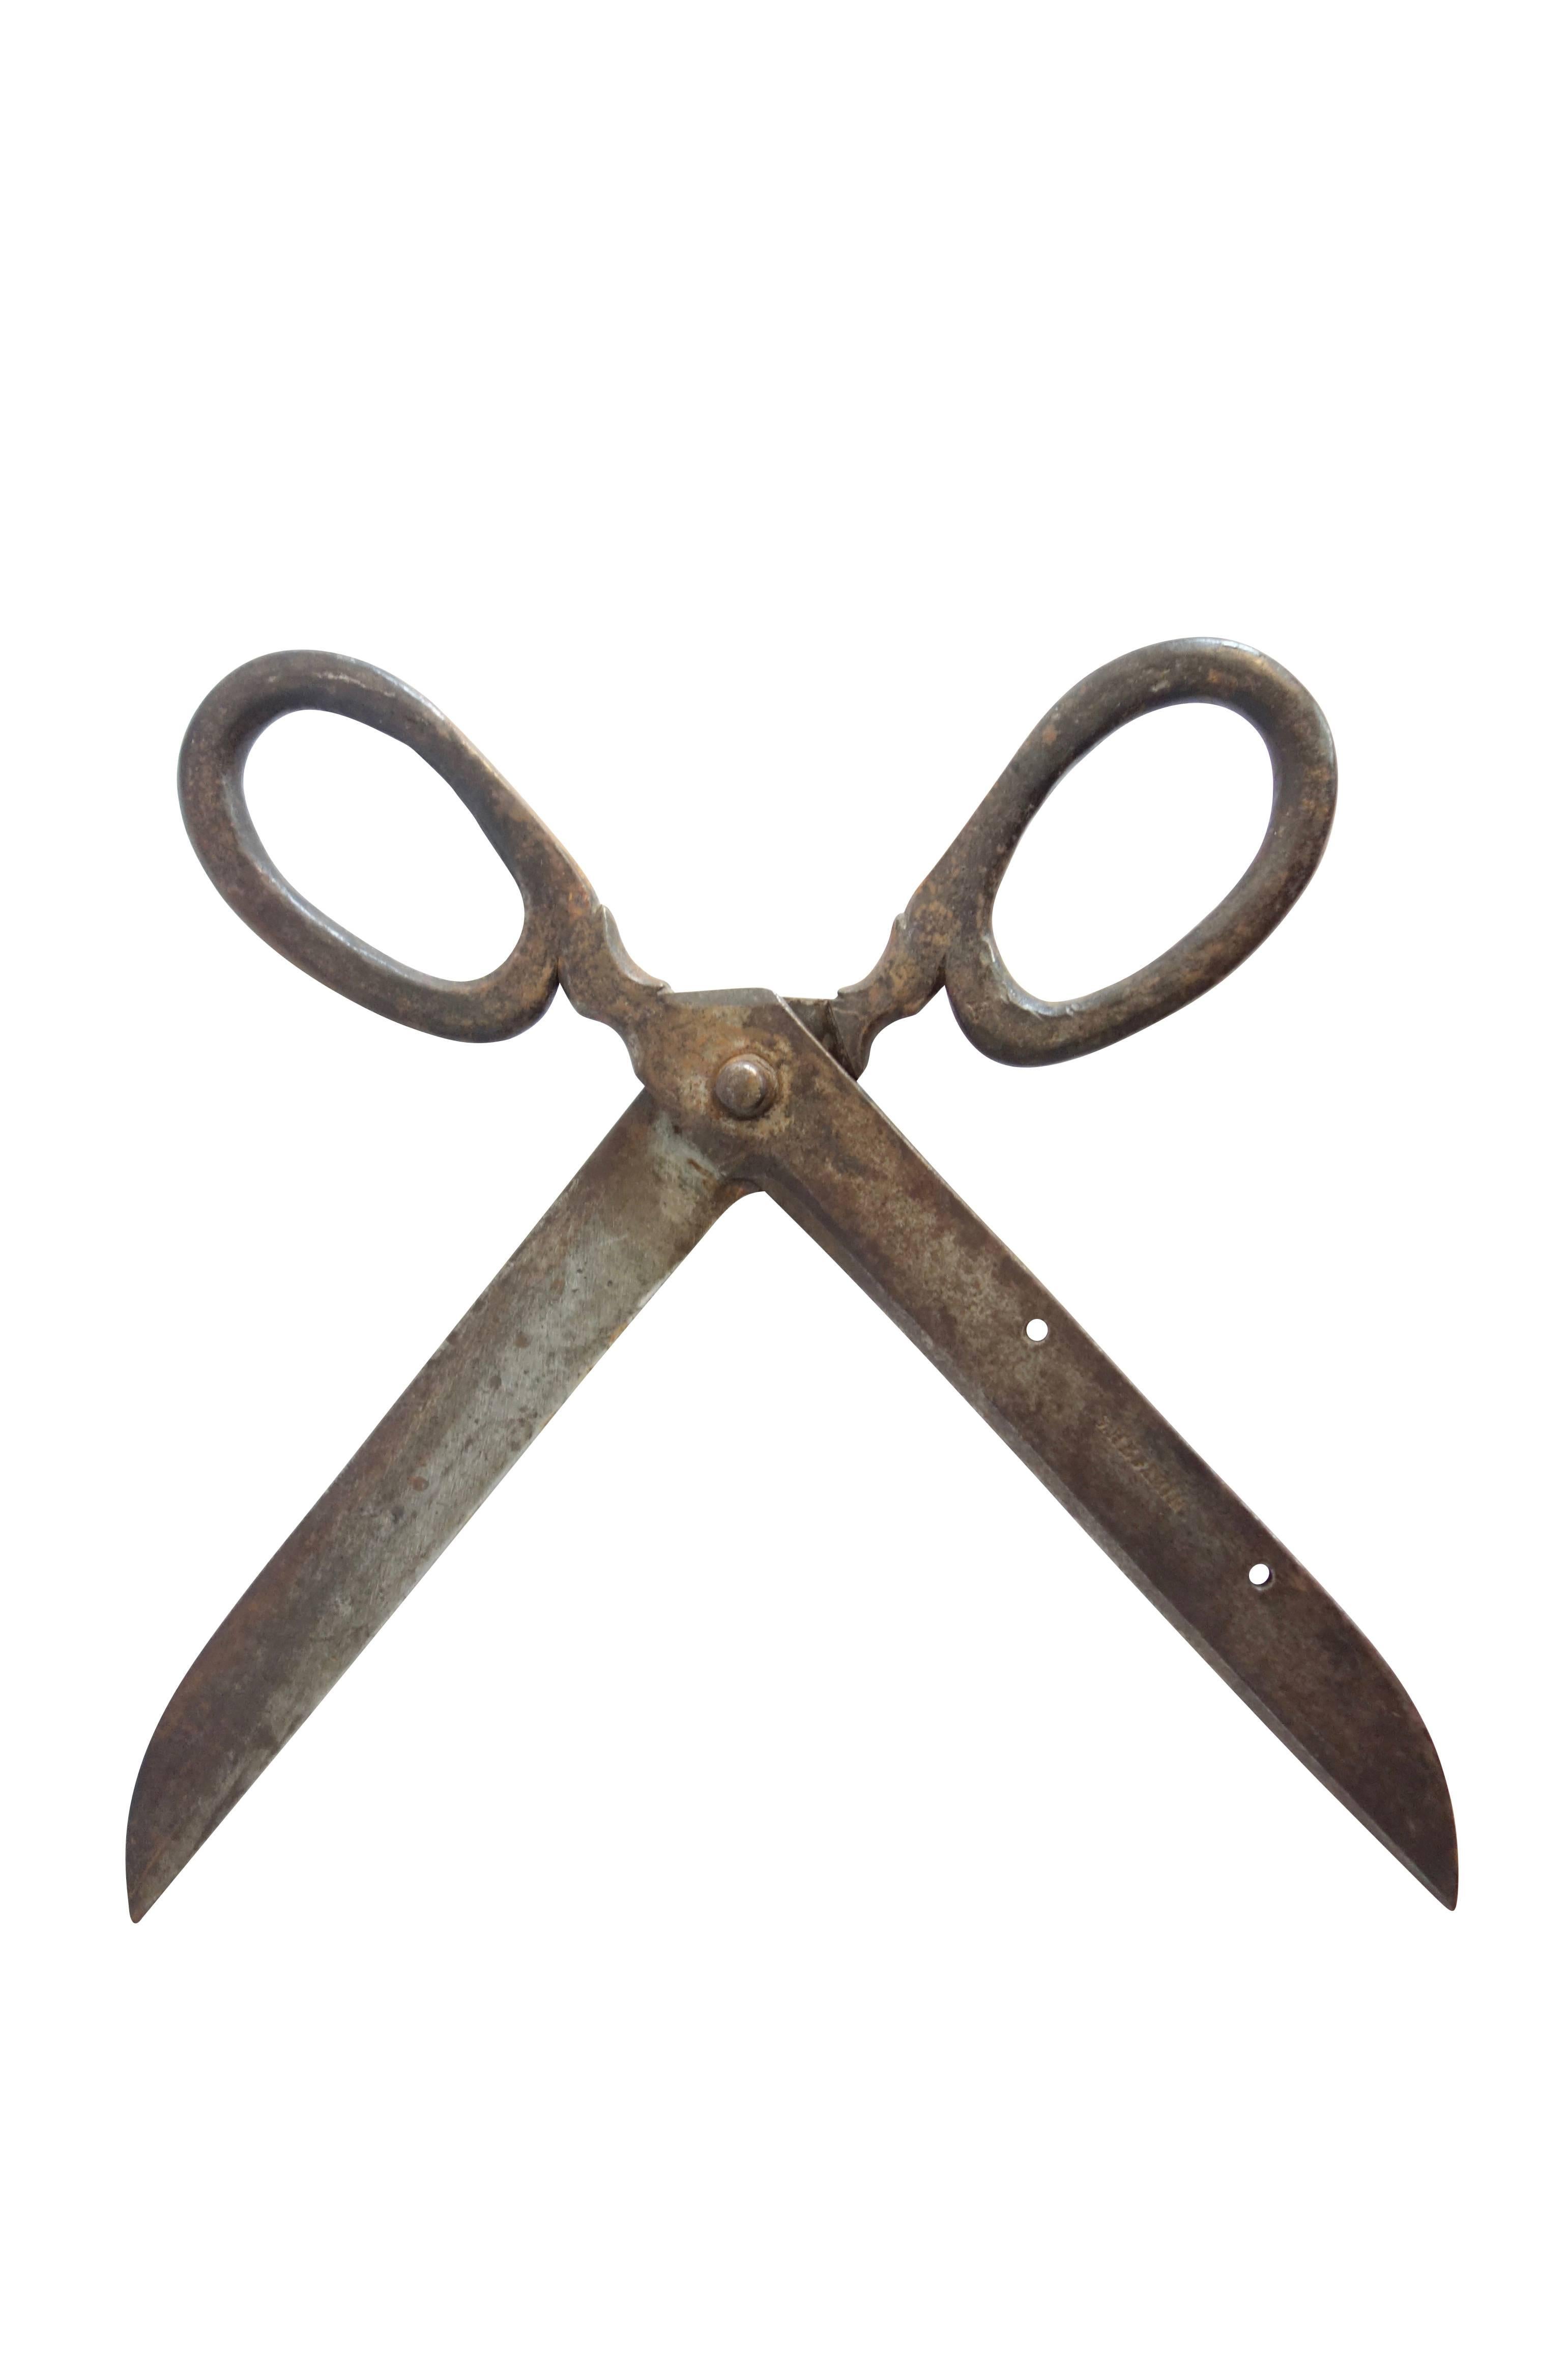 This is a pair of giant steel scissors stamped 